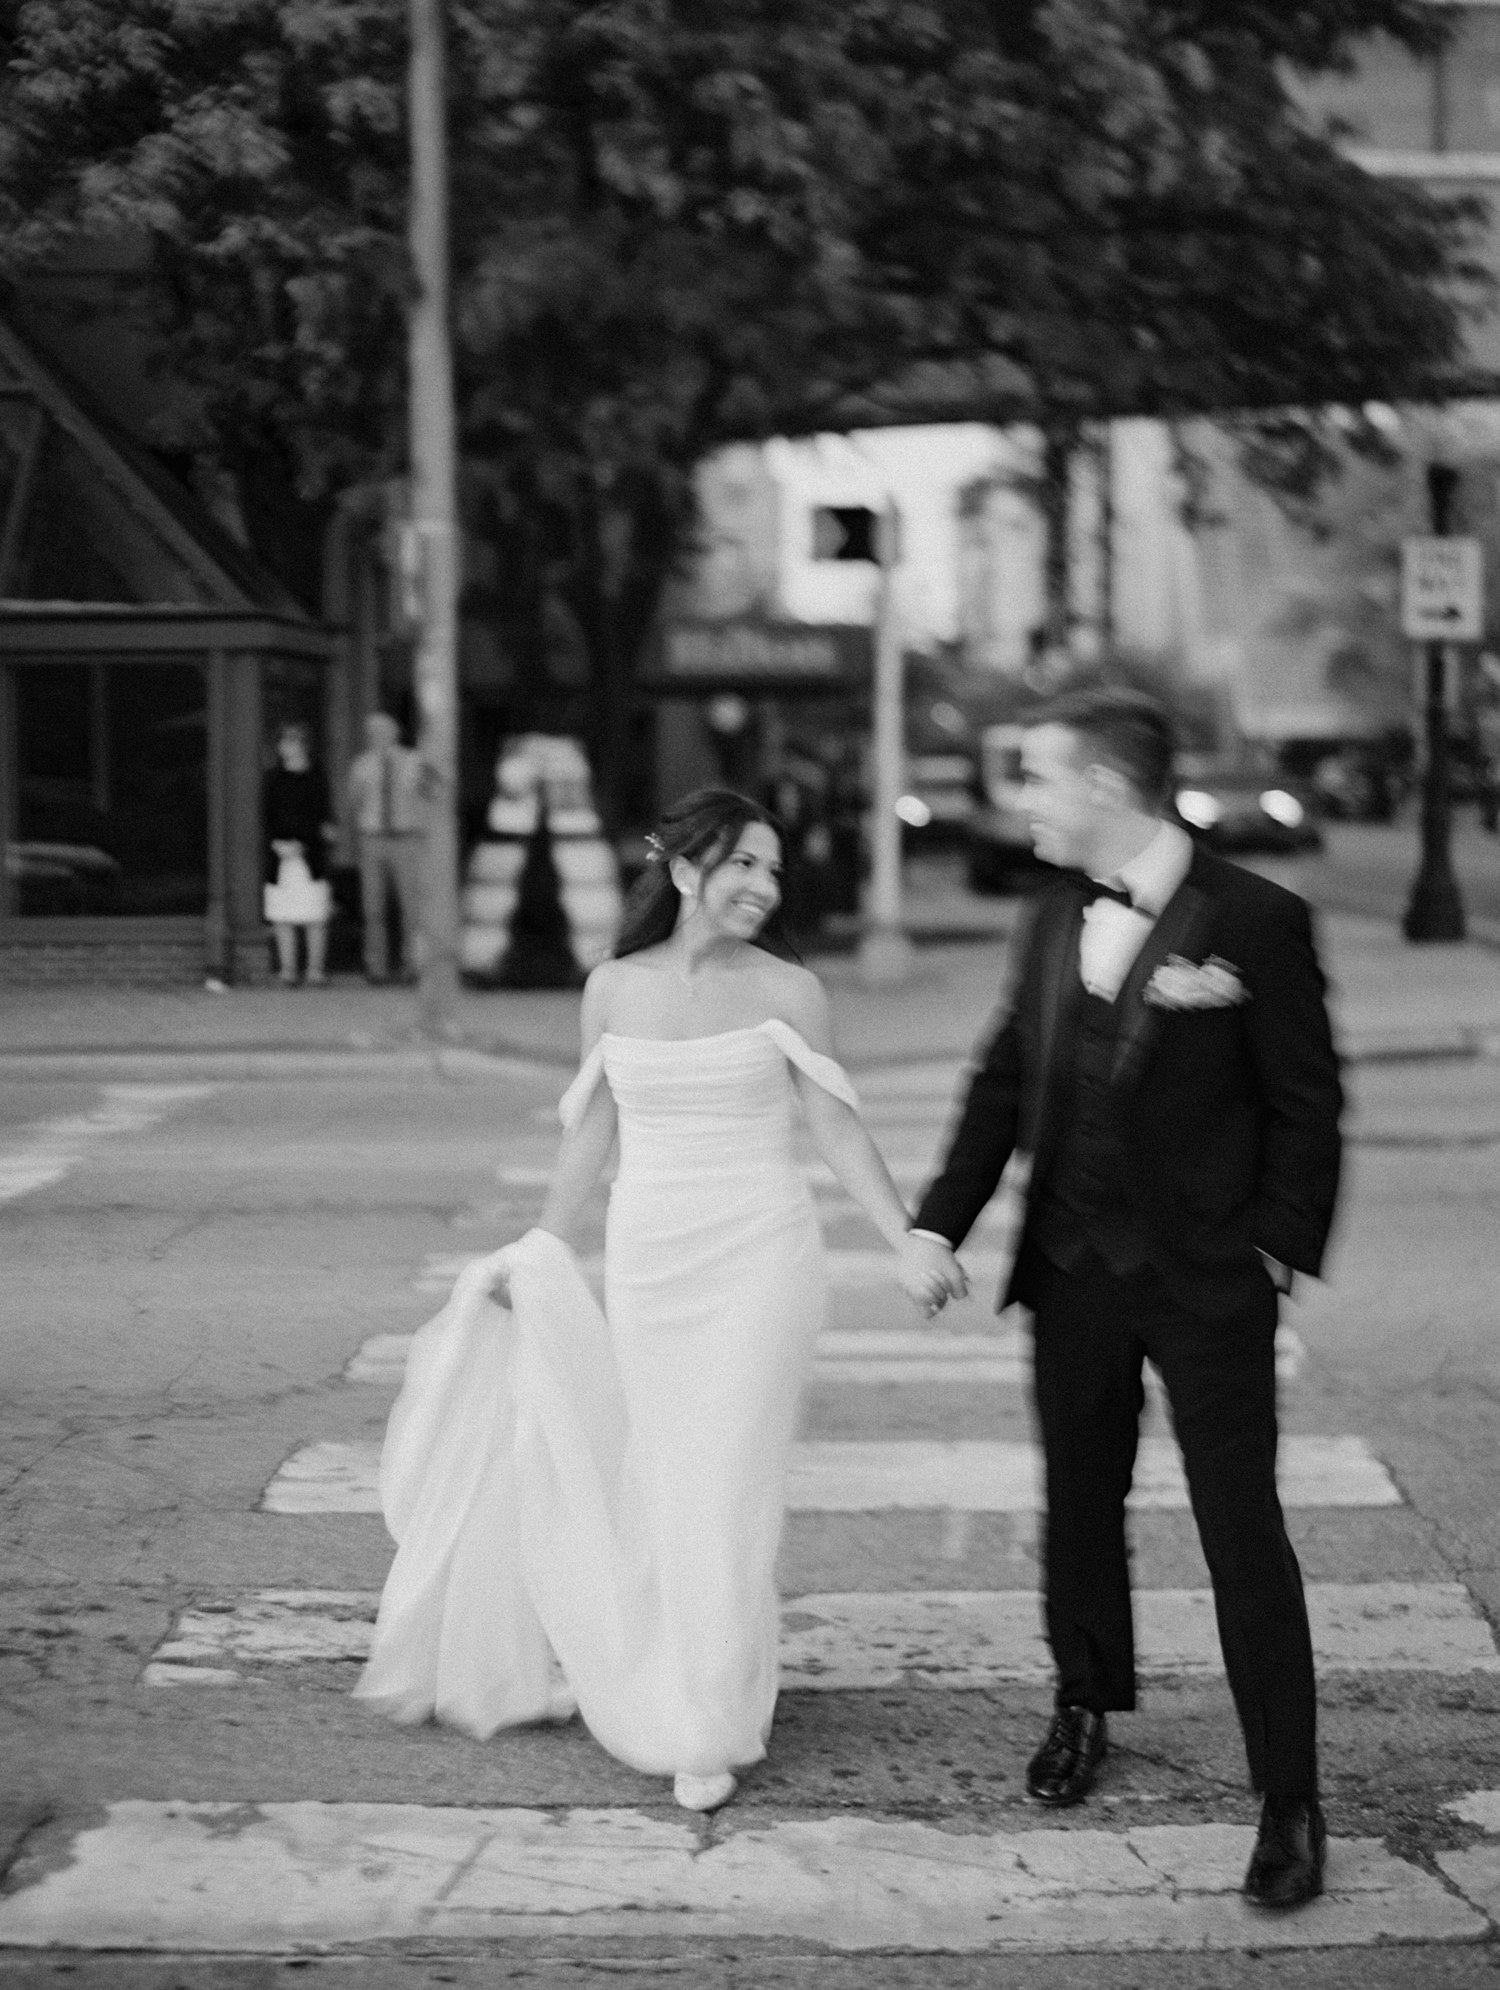 Fort Wayne Indiana Wedding at the Embassy by Allison Francois Photography